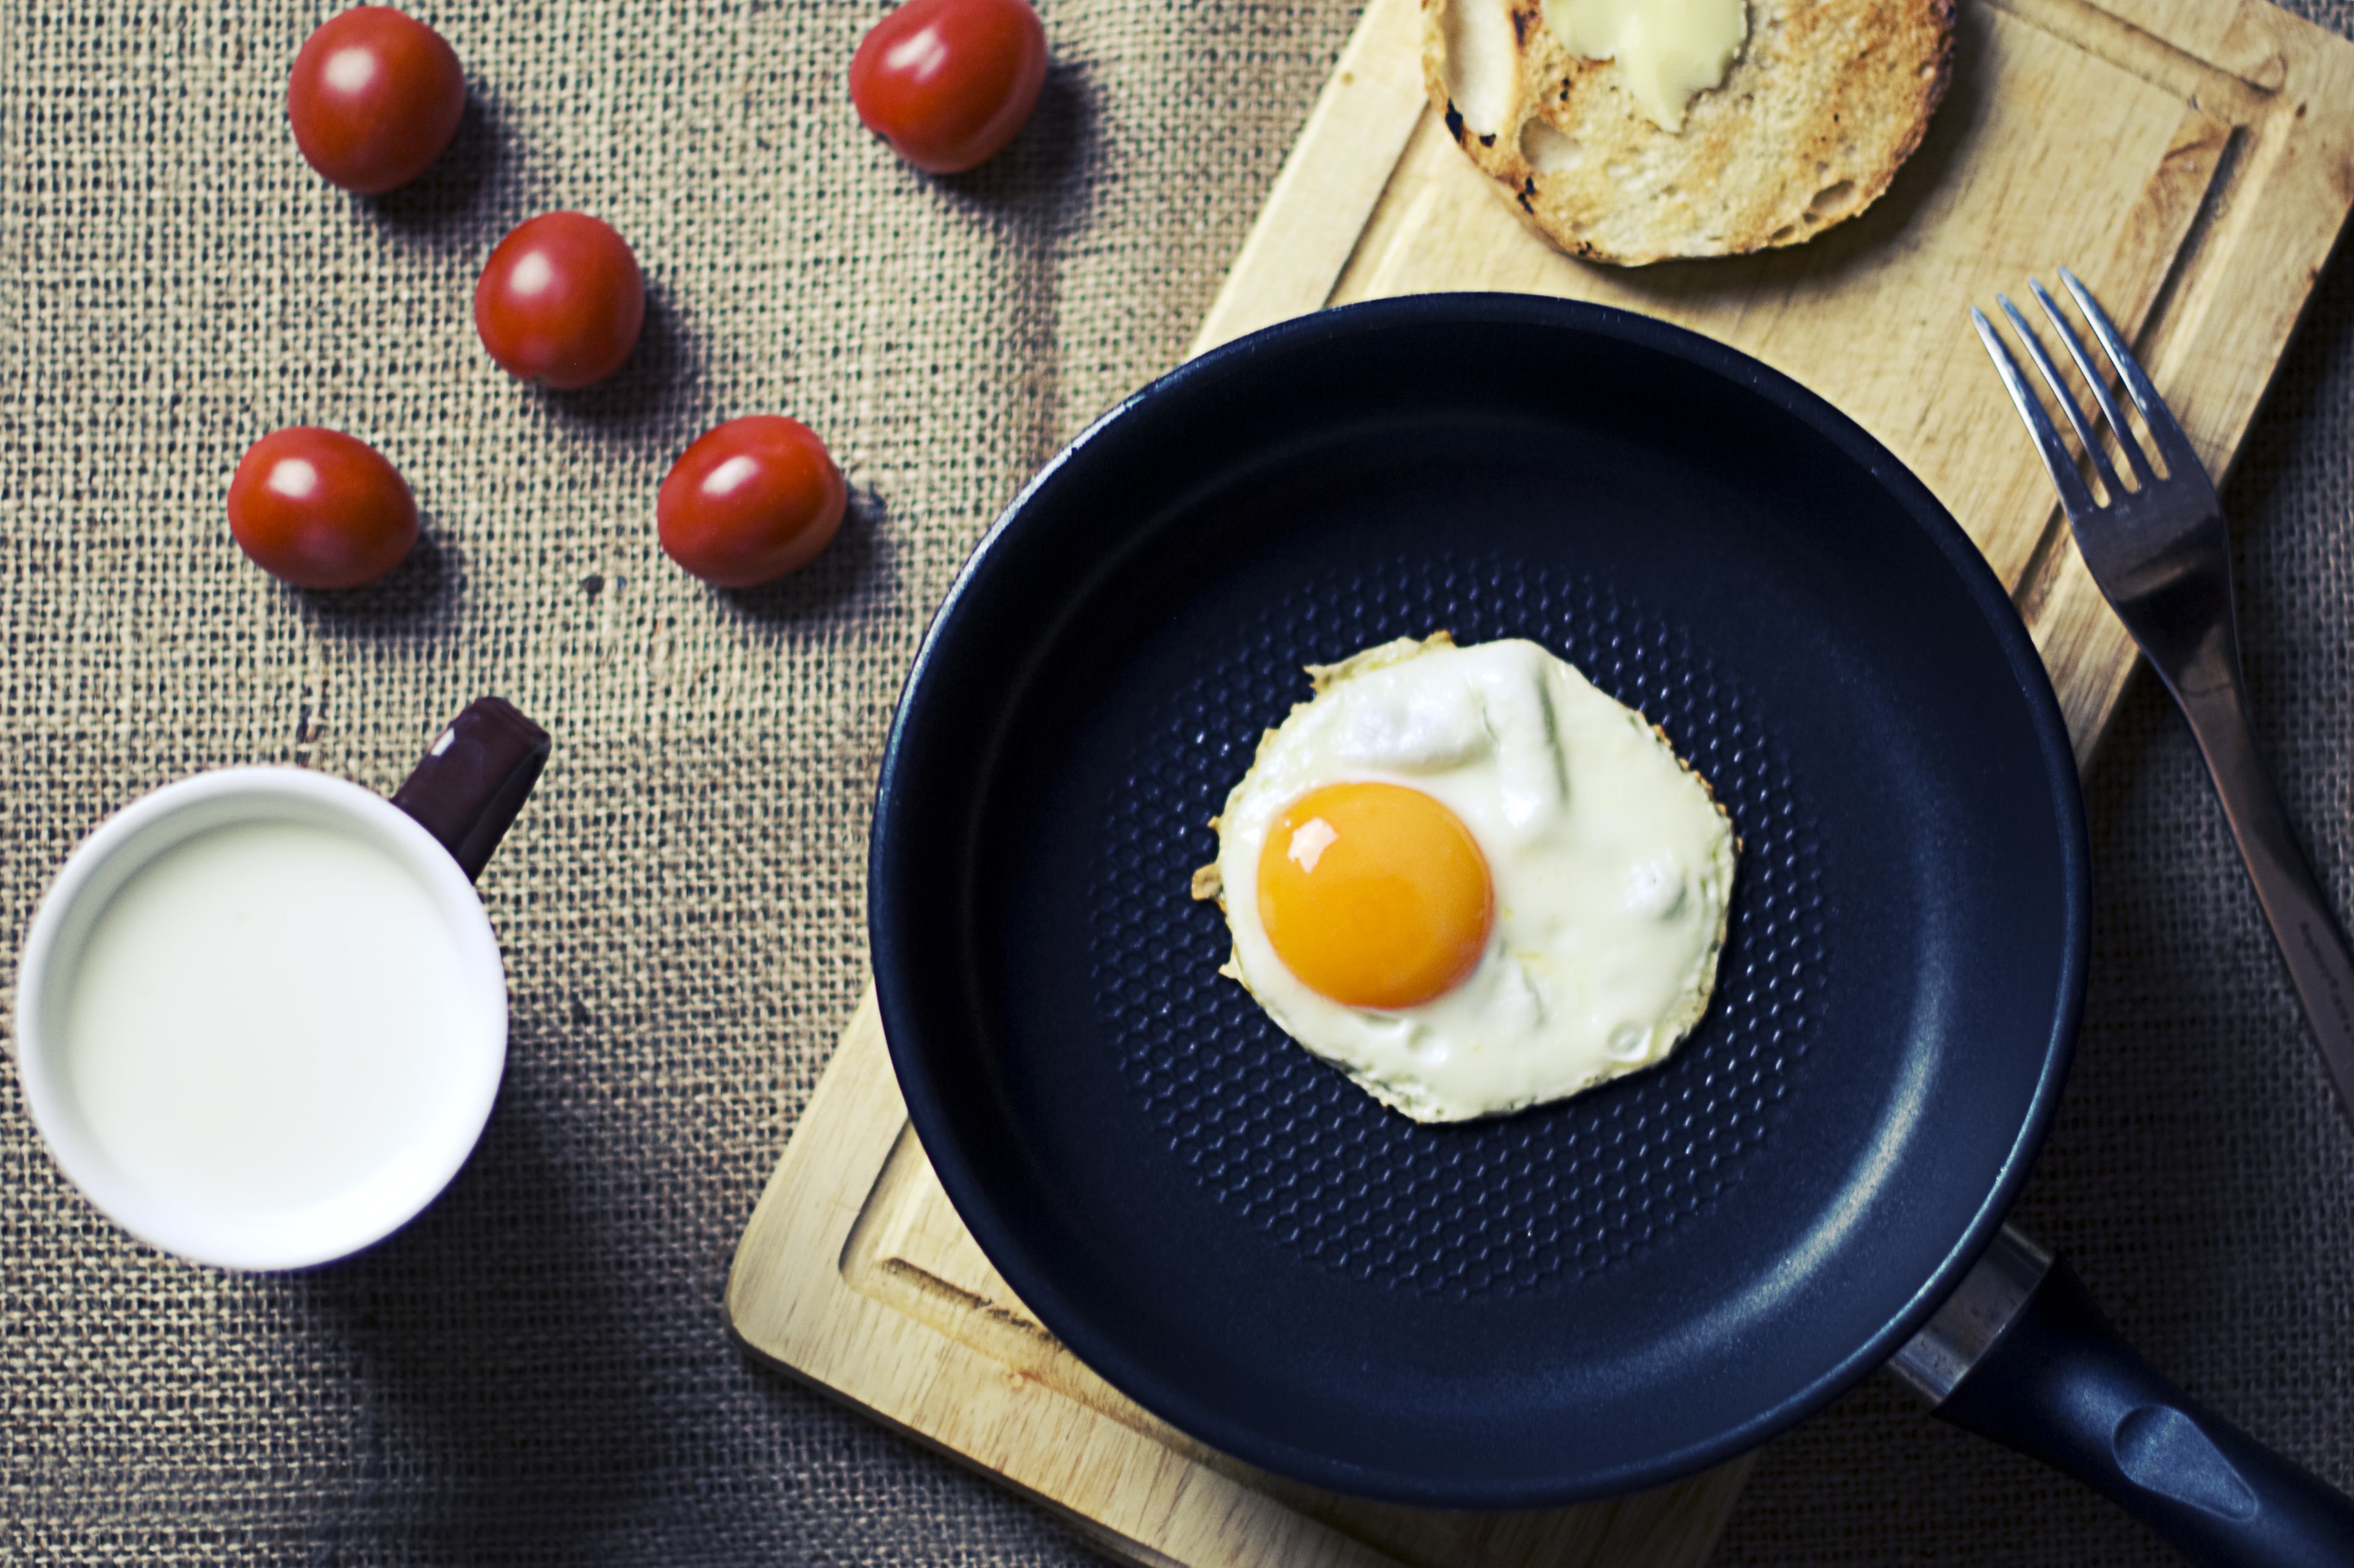 Eating Egg Yolk Is Bad For Your Heart? Science Says The Opposite